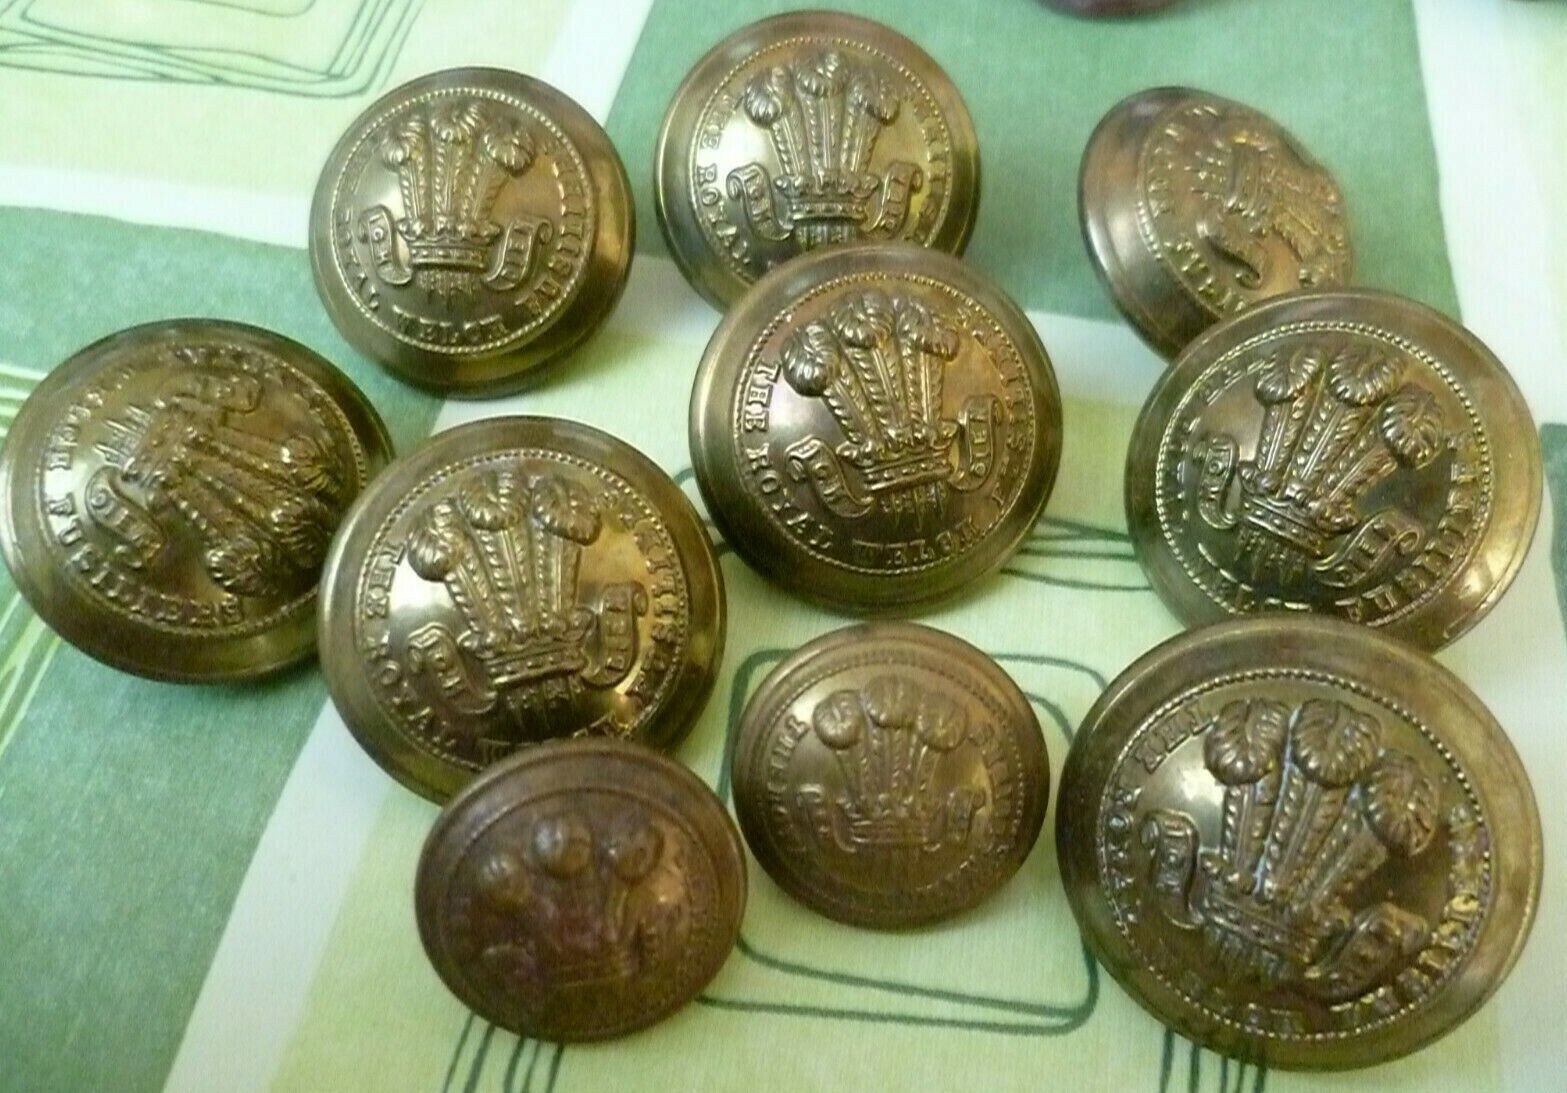 The Royal Welch Fusiliers Button 10 pcs 25&17 mm-Gaunt & Superb Extrs ANTIQUE Or